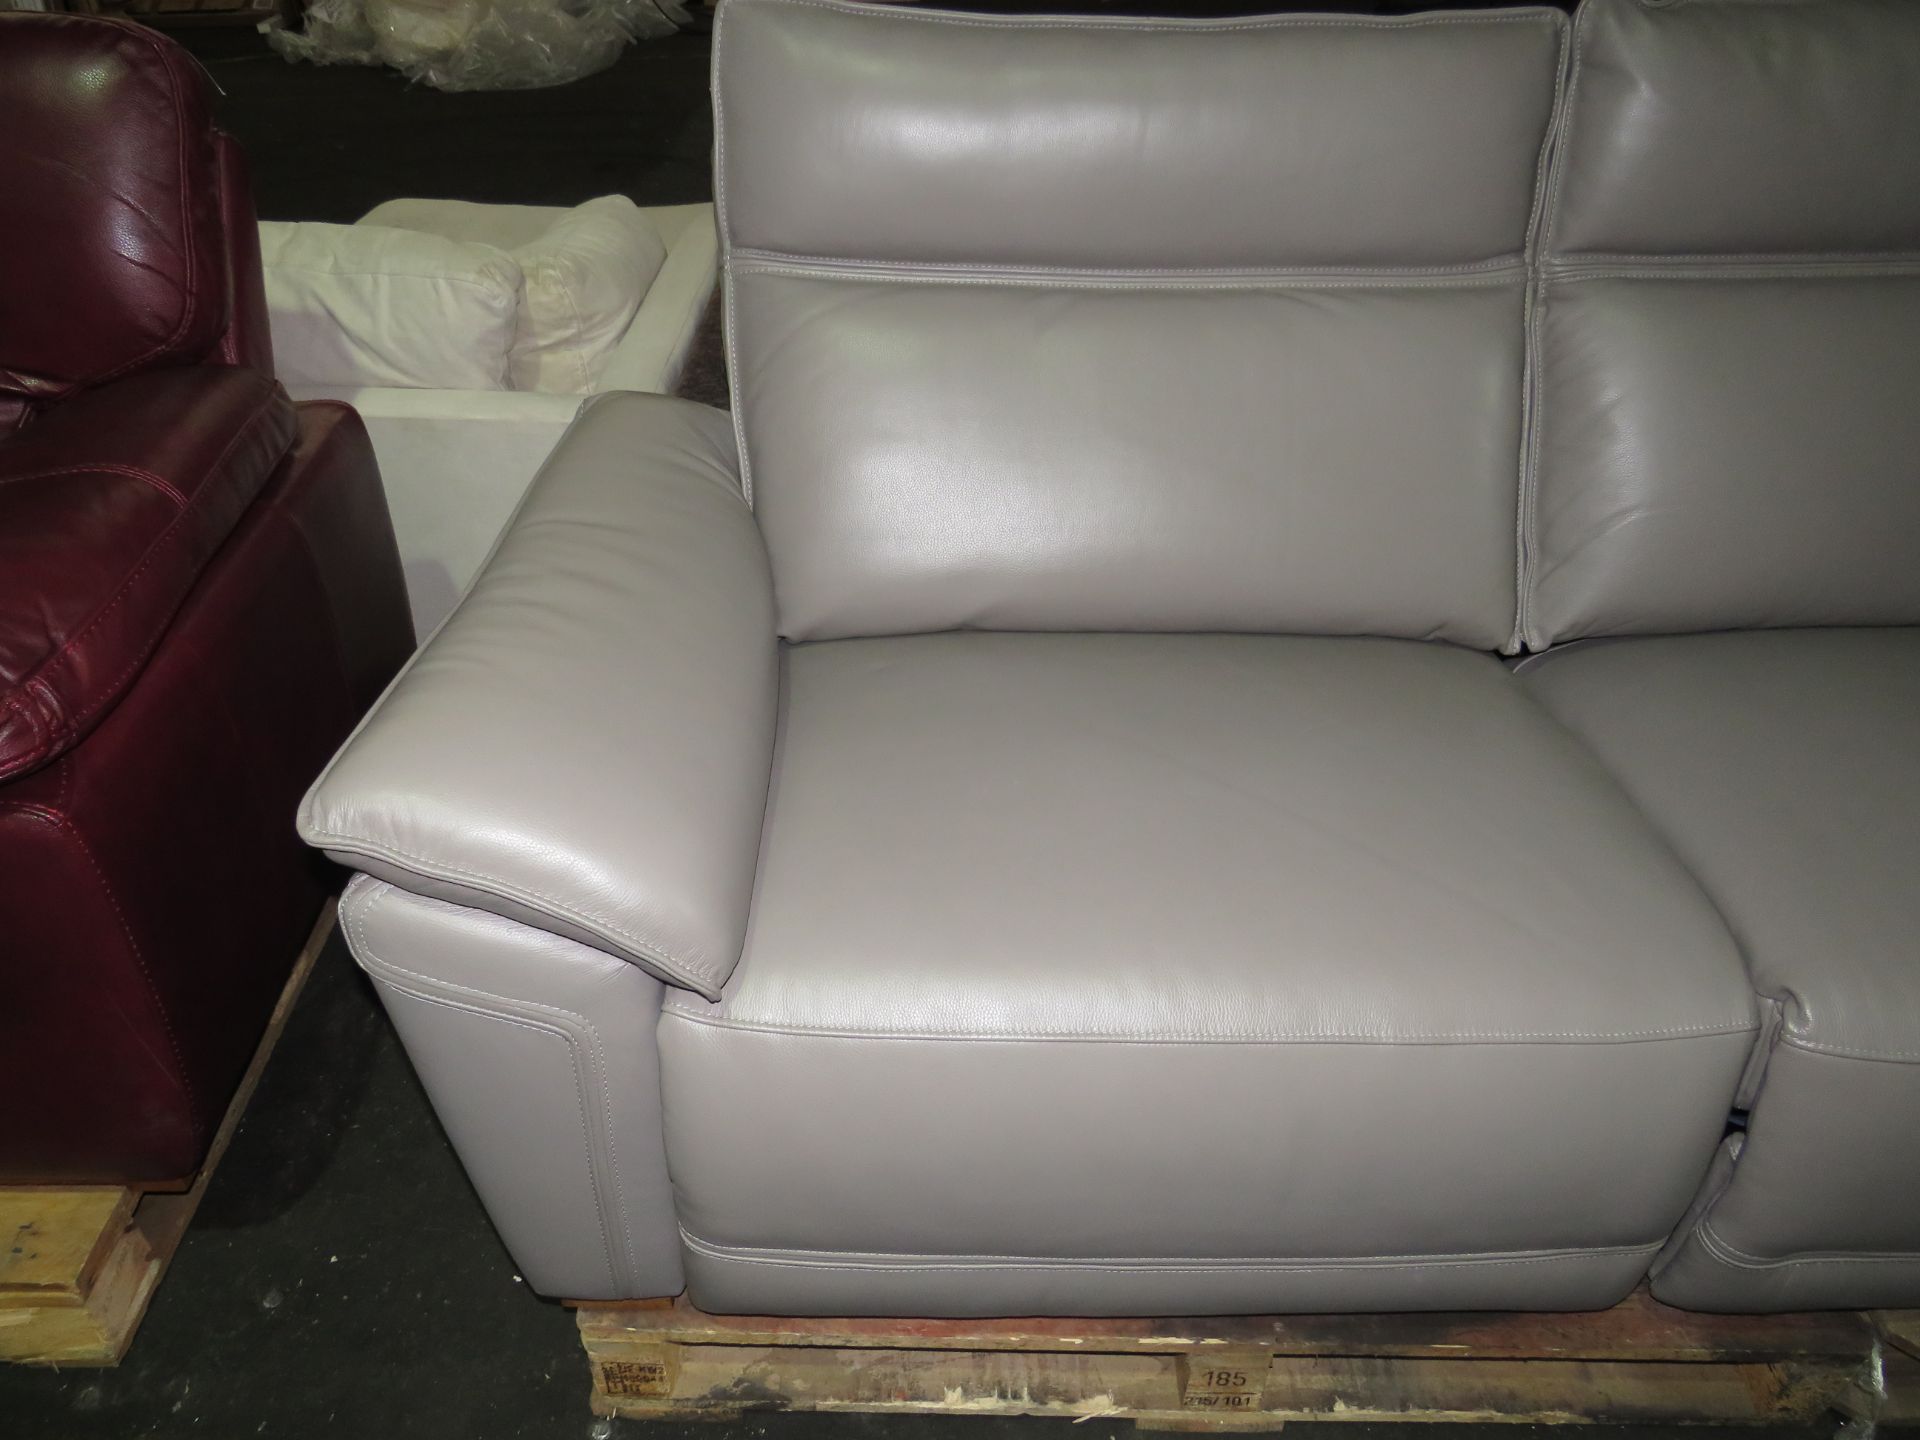 Oak Furnitureland Dune 3 Seater Electric Recliner Sofa in Elephant Grey Leather, it is missing two - Image 2 of 3